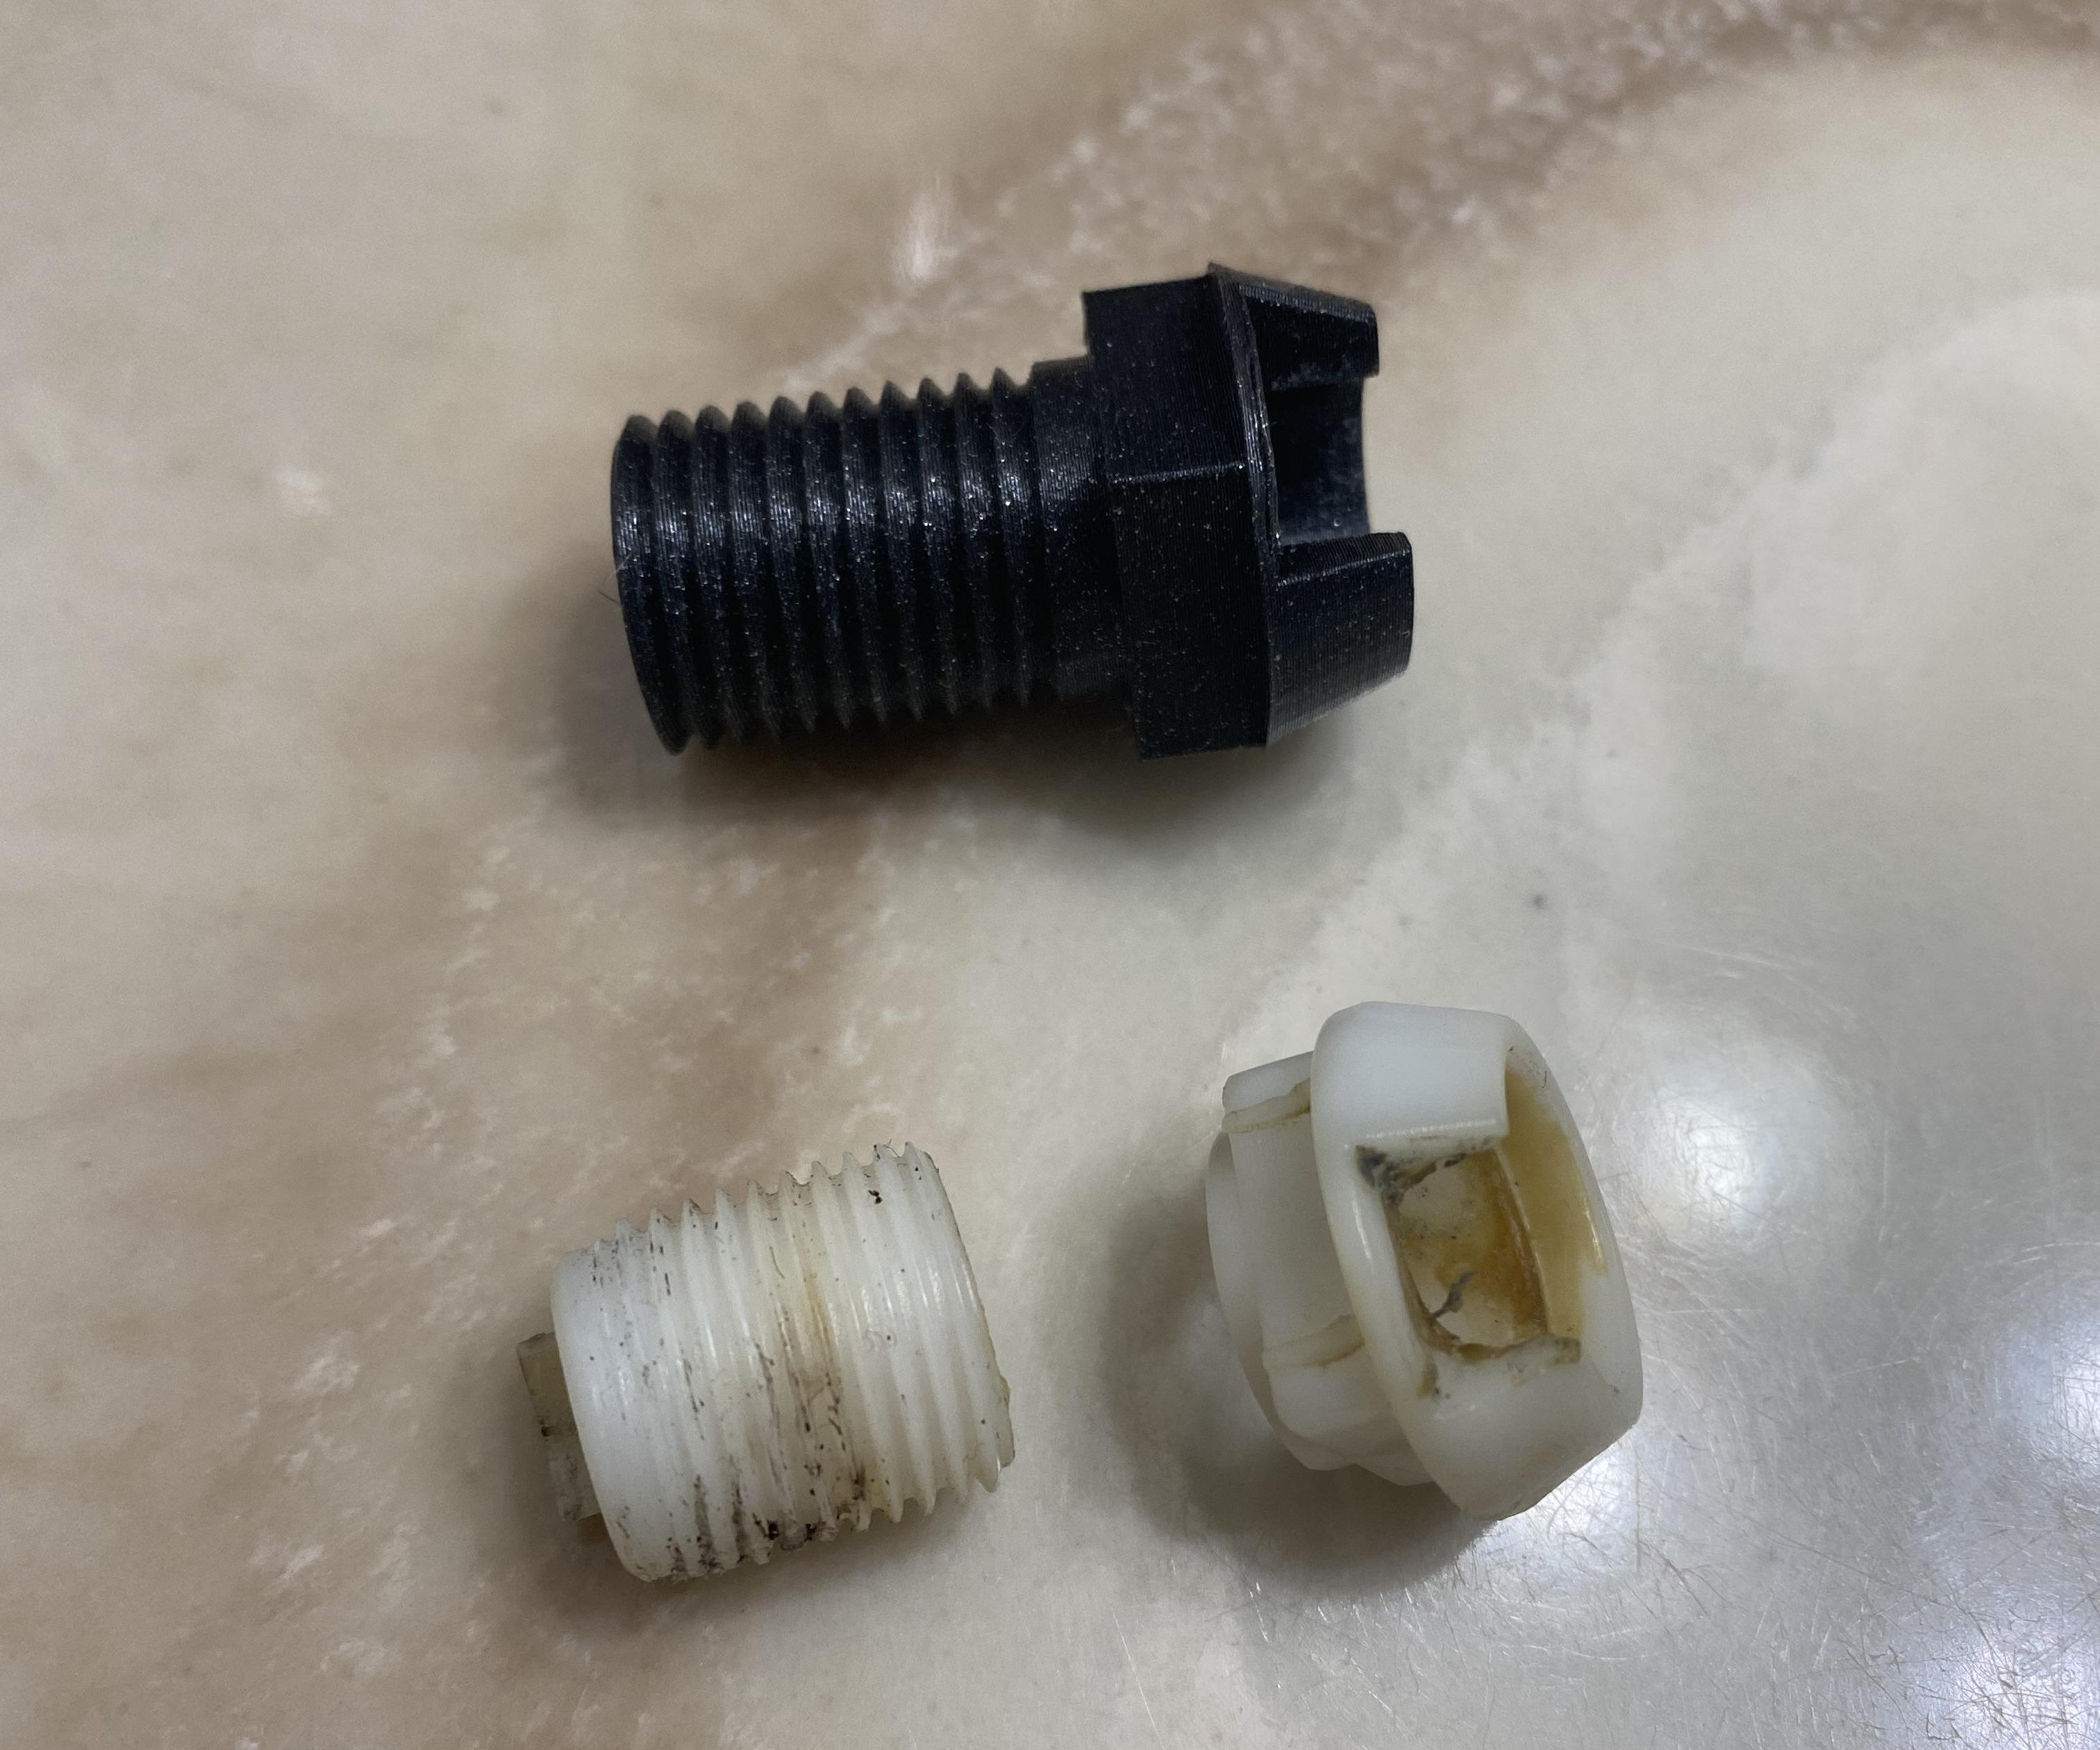 How to Fix a Broken Toilet With 3D Printing!